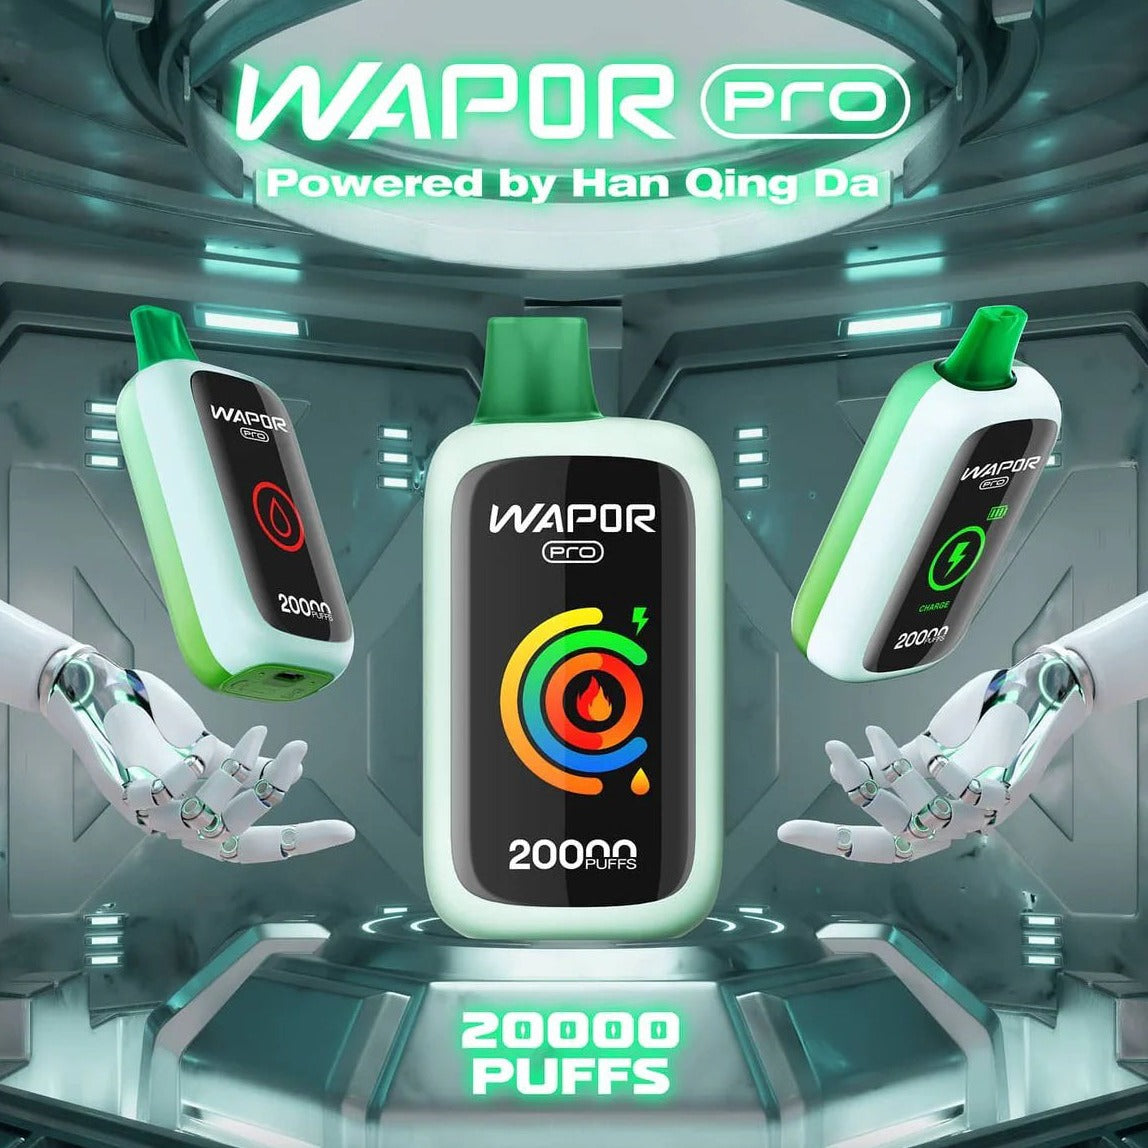 Wapor Pro 20000 Puffs Rechargeable Disposable Device Powered by Han Qing Da - 20000 Puffs [BUY 10 BOXES GET 1 FREE]